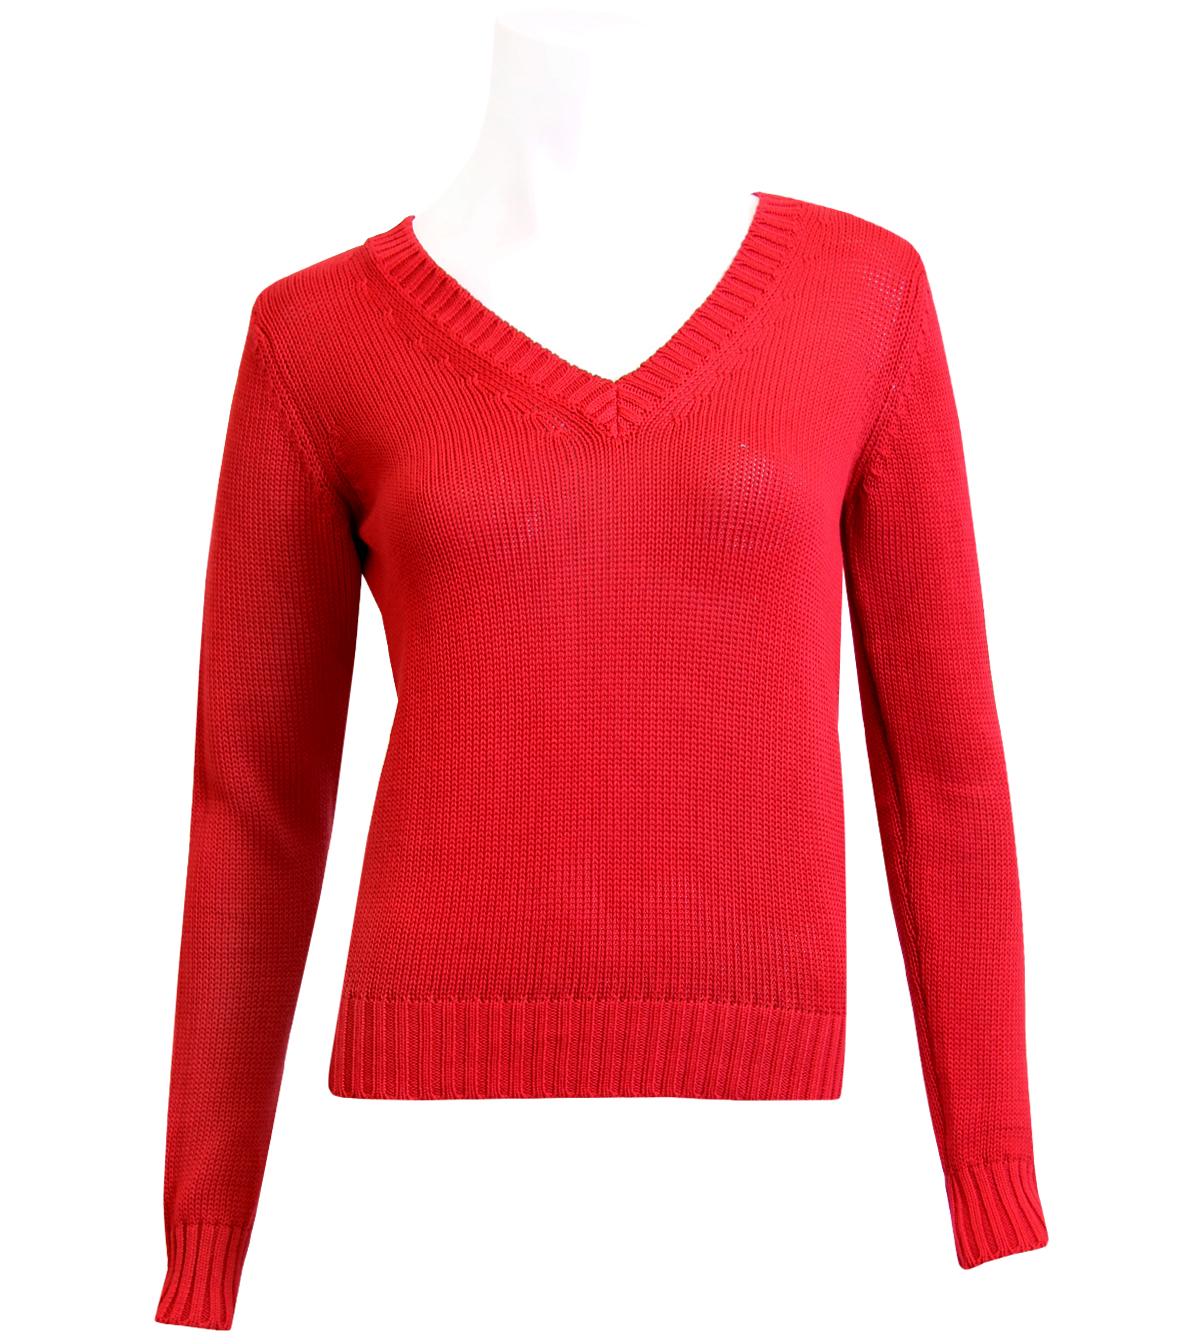 Foto Armani Jeans Red Knitted Cotton V Neck Sweatshirt foto 260682